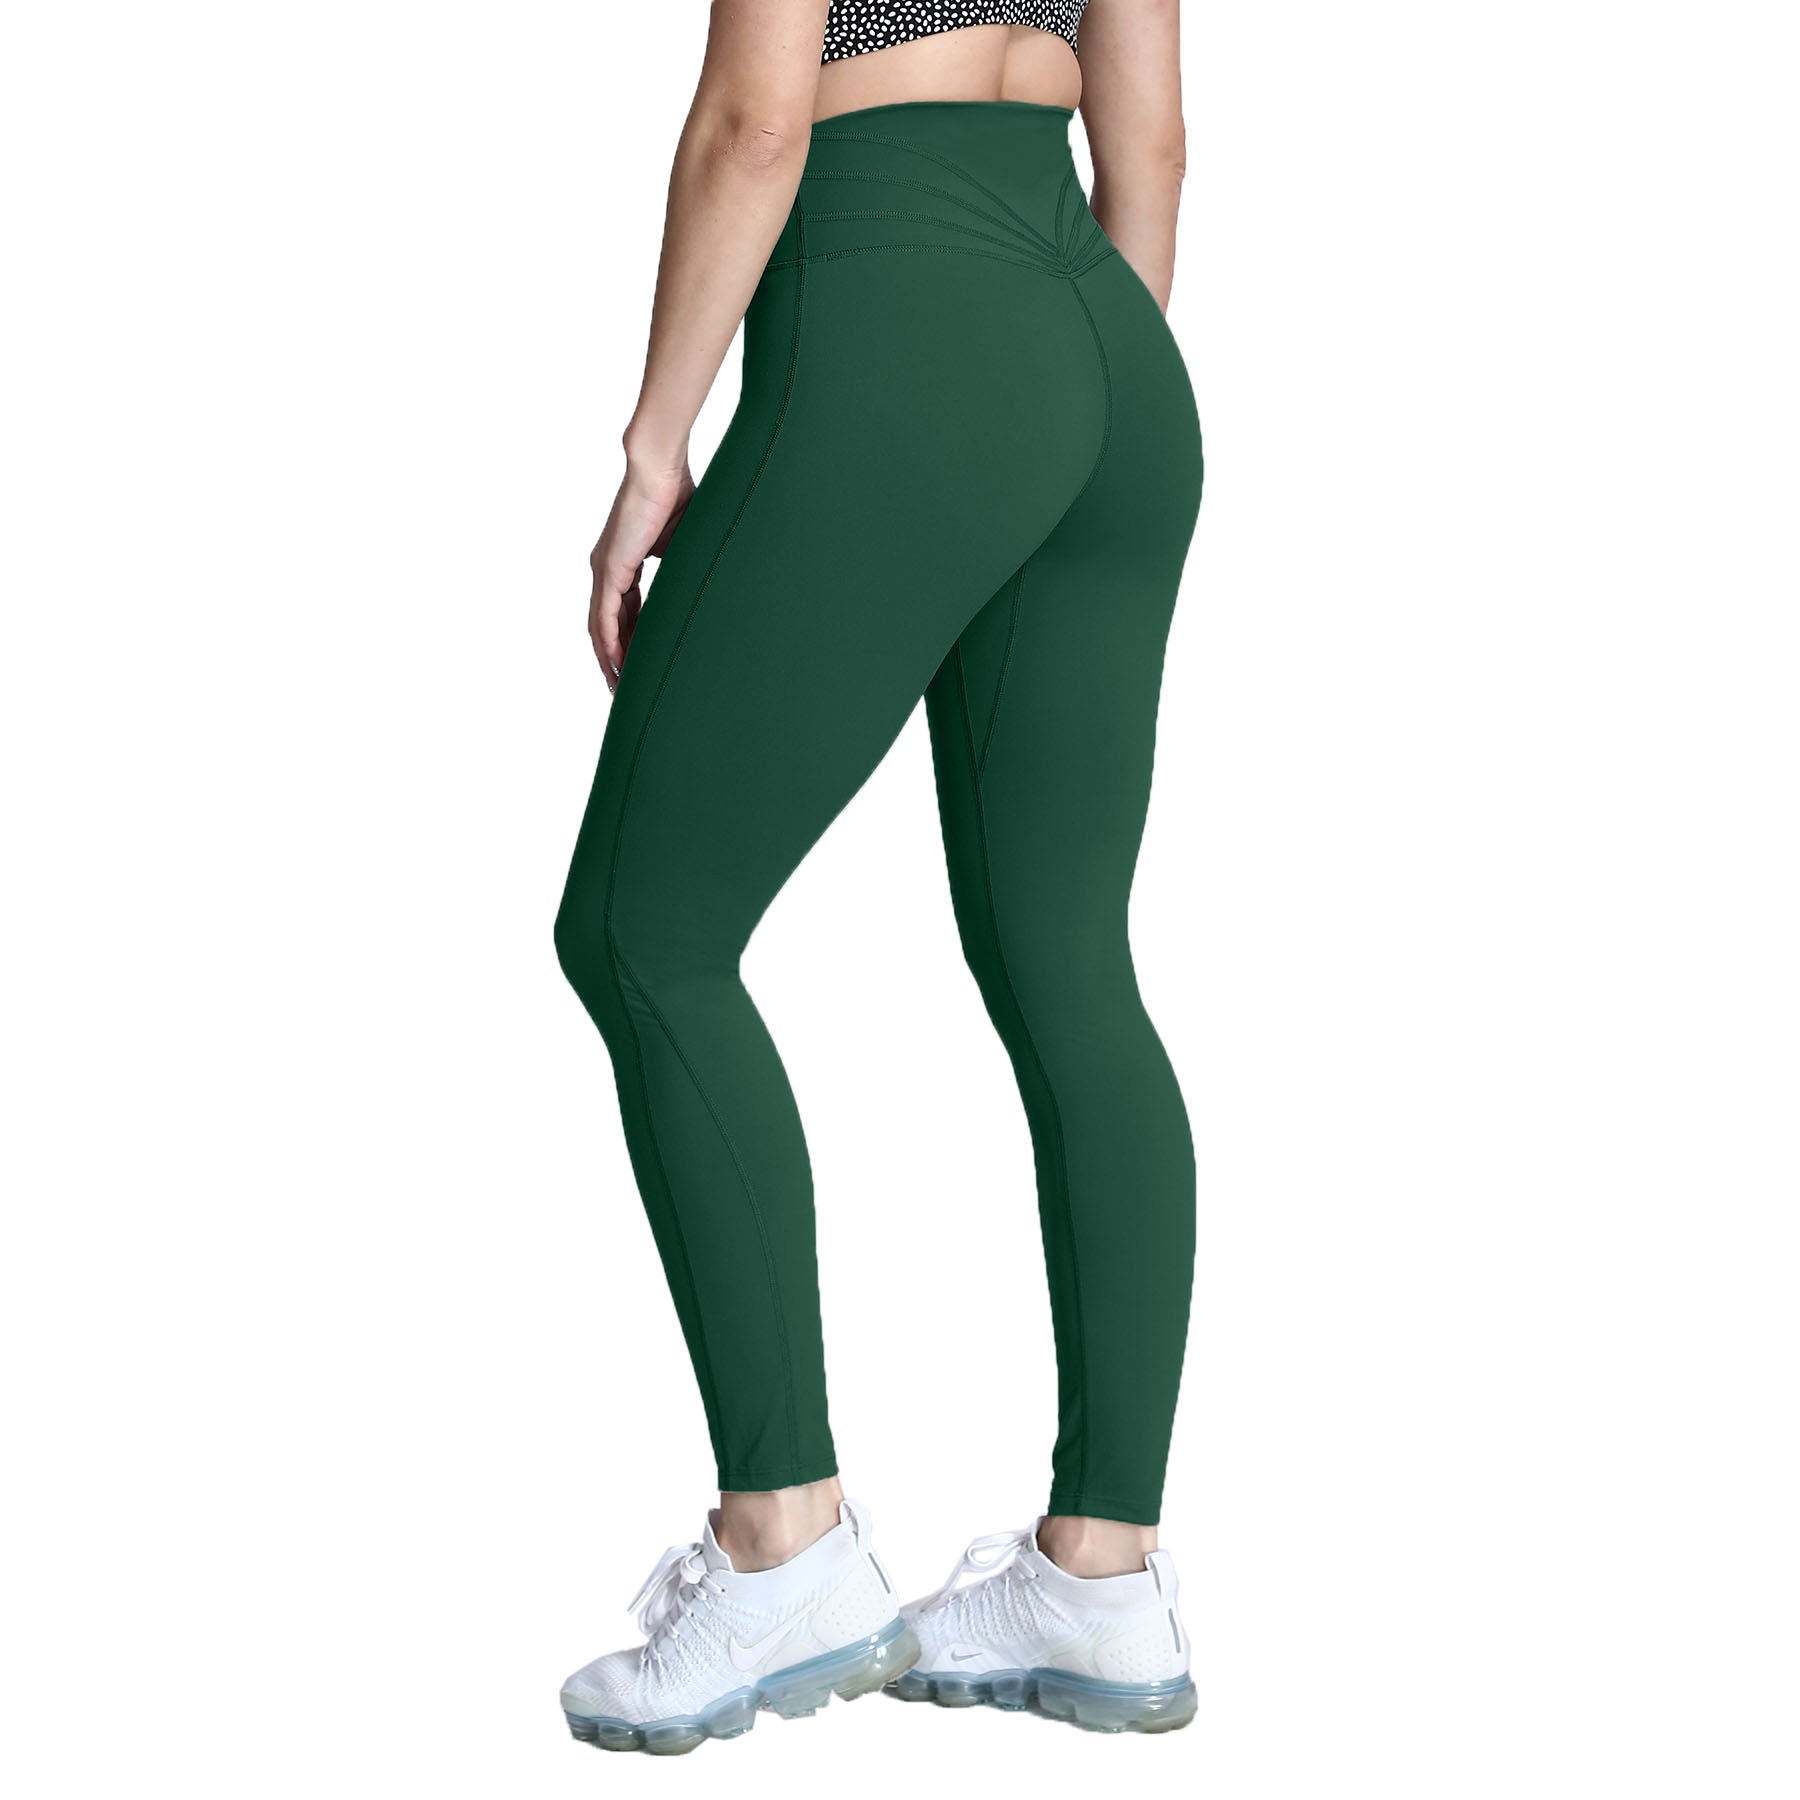 Aoxjox Women's High Waisted Yoga Pants Workout Buttery Soft Trinity Full  Length Leggings